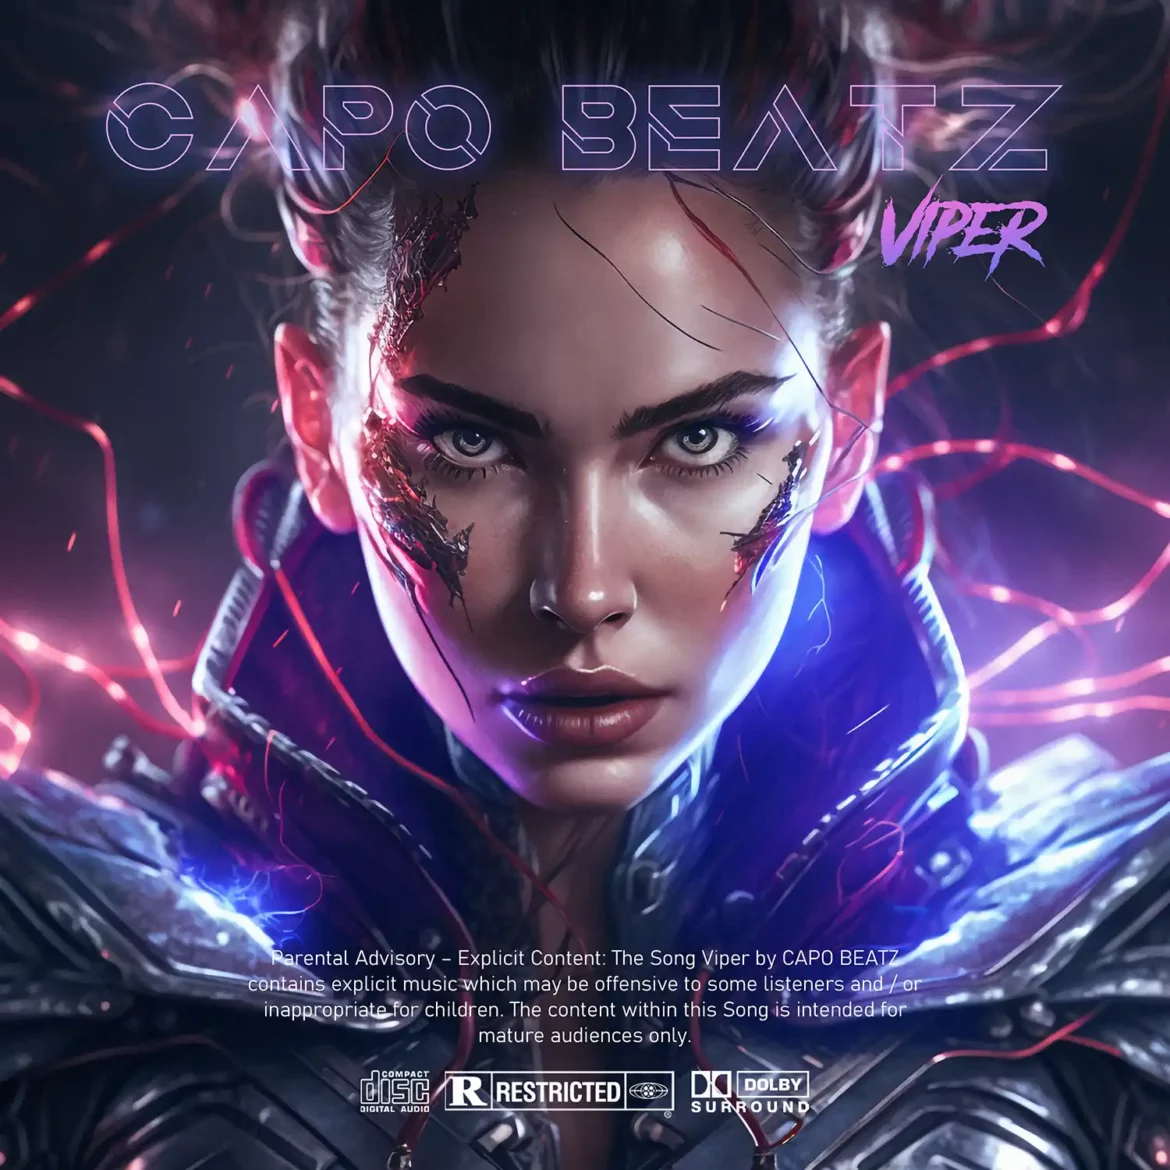 Cover of Capo Beatz's 'VIPER' single - A vibrant design featuring the artist name, song title, and futuristic elements.